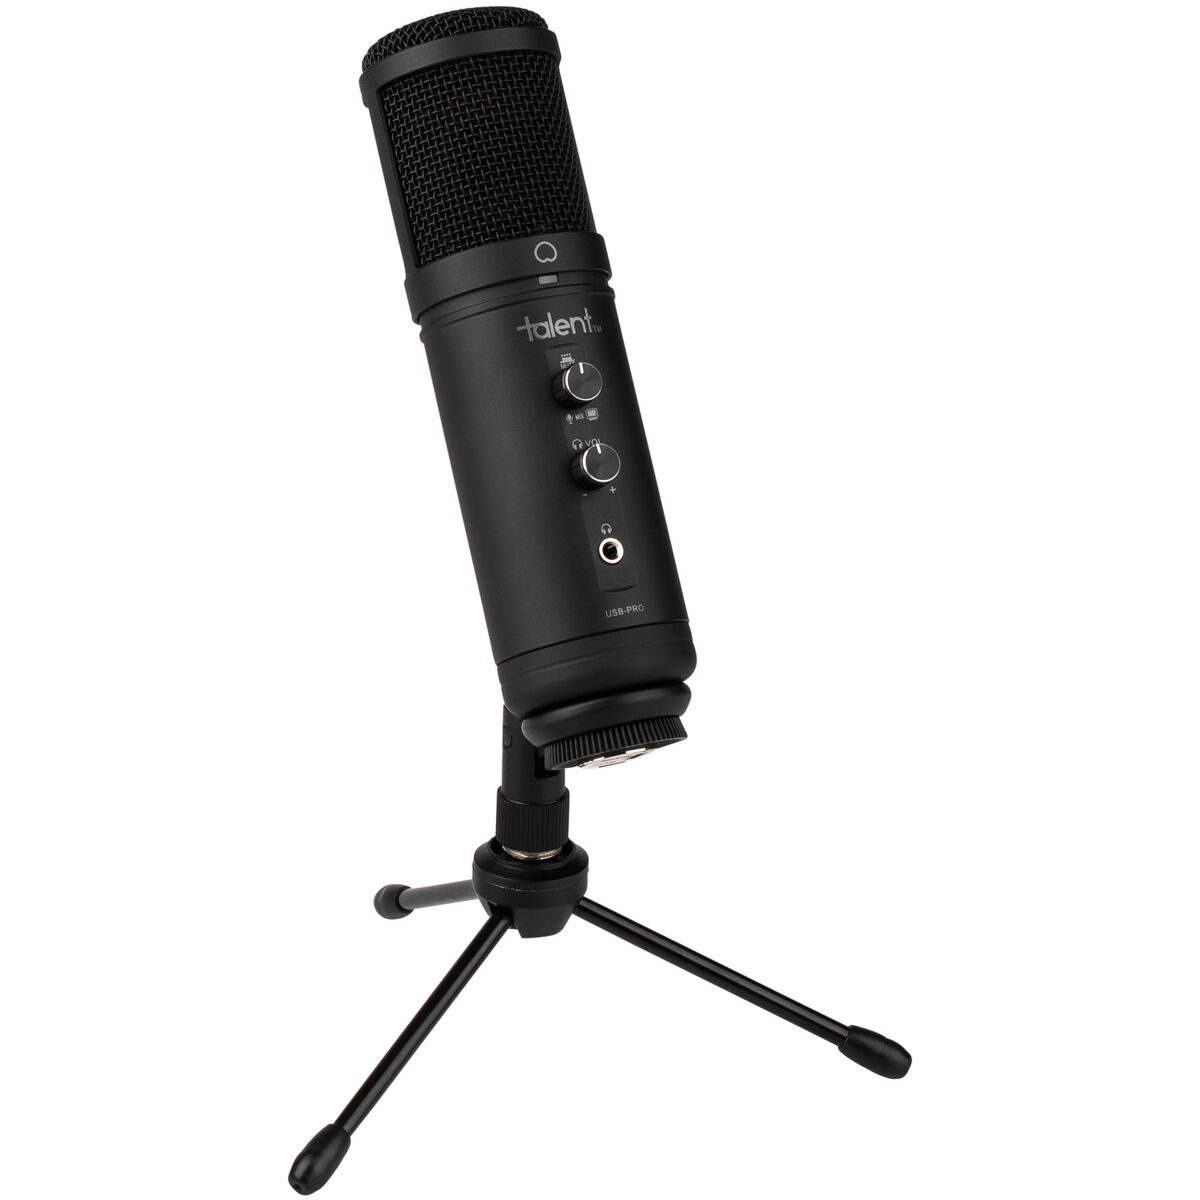 Audio interface HD300T USB/XLR Cardioid Dynamic Microphone Idea for Podcasting Mixer MAONO All Metal Professional Zero-latency Monitoring Mic with Volume Control for PC live streaming Computer 